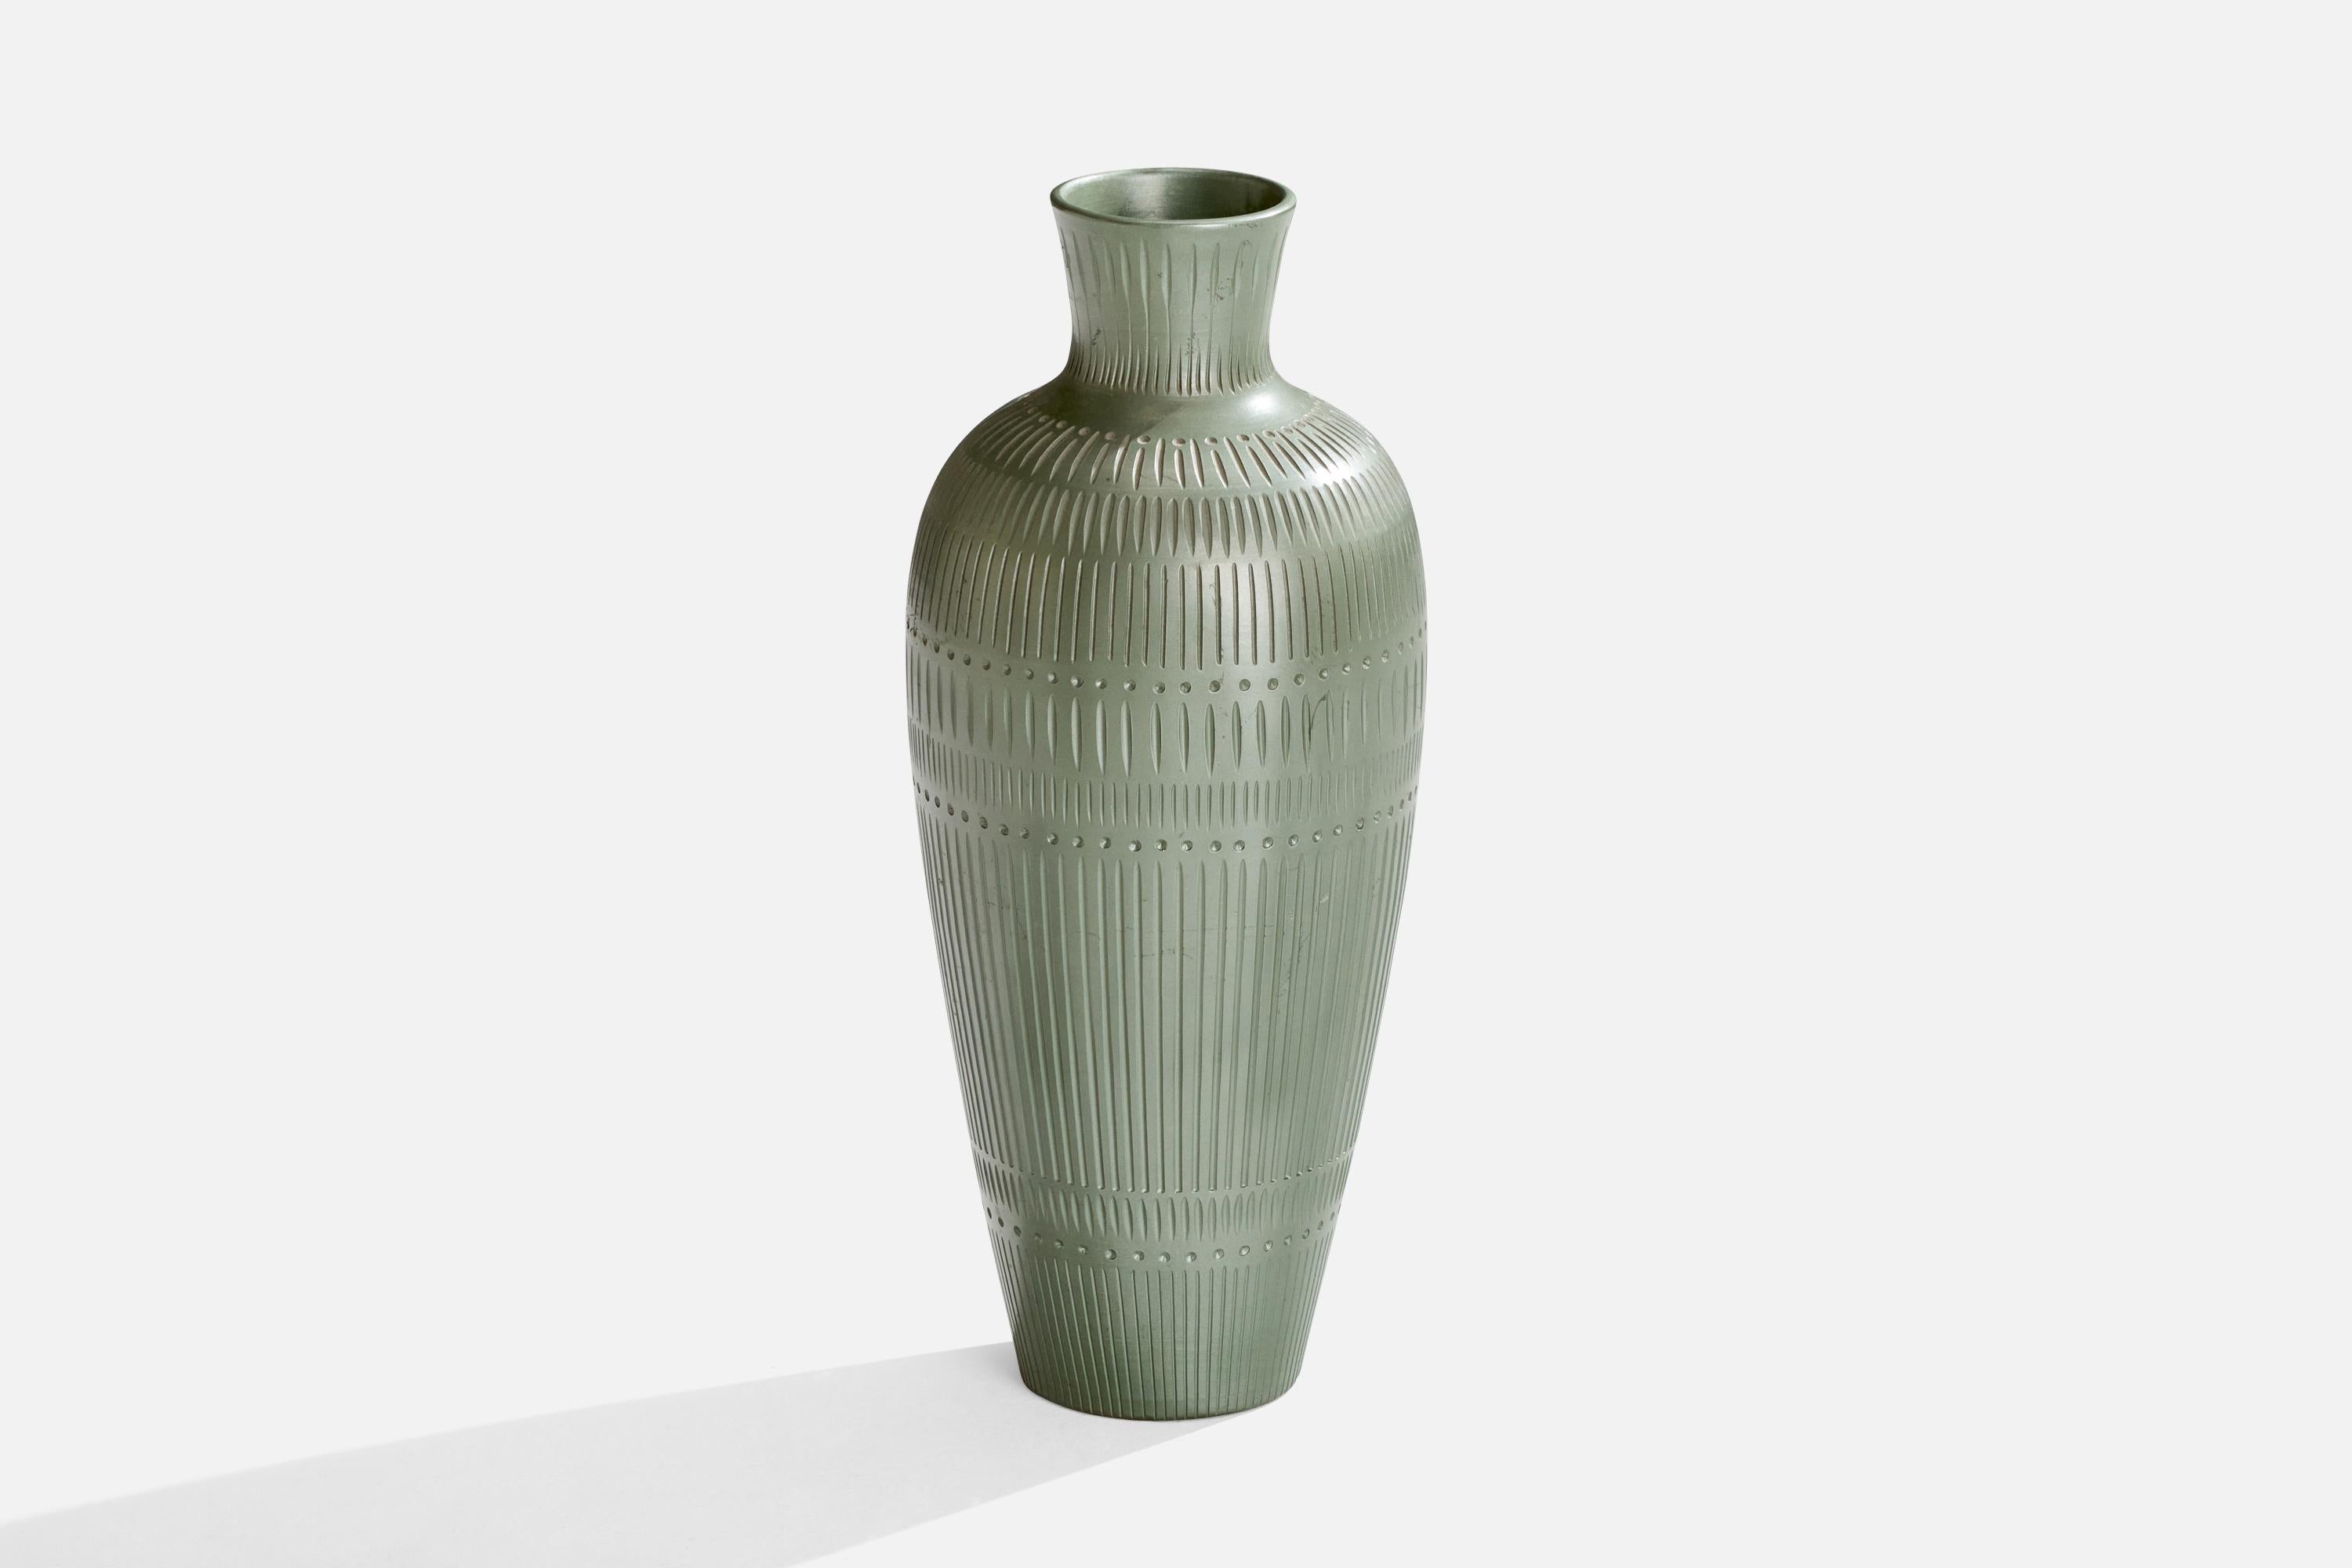 A green-glazed earthenware floor vase designed by Anna-Lisa Thomson and produced by Upsala Ekeby, Sweden, 1940s.
